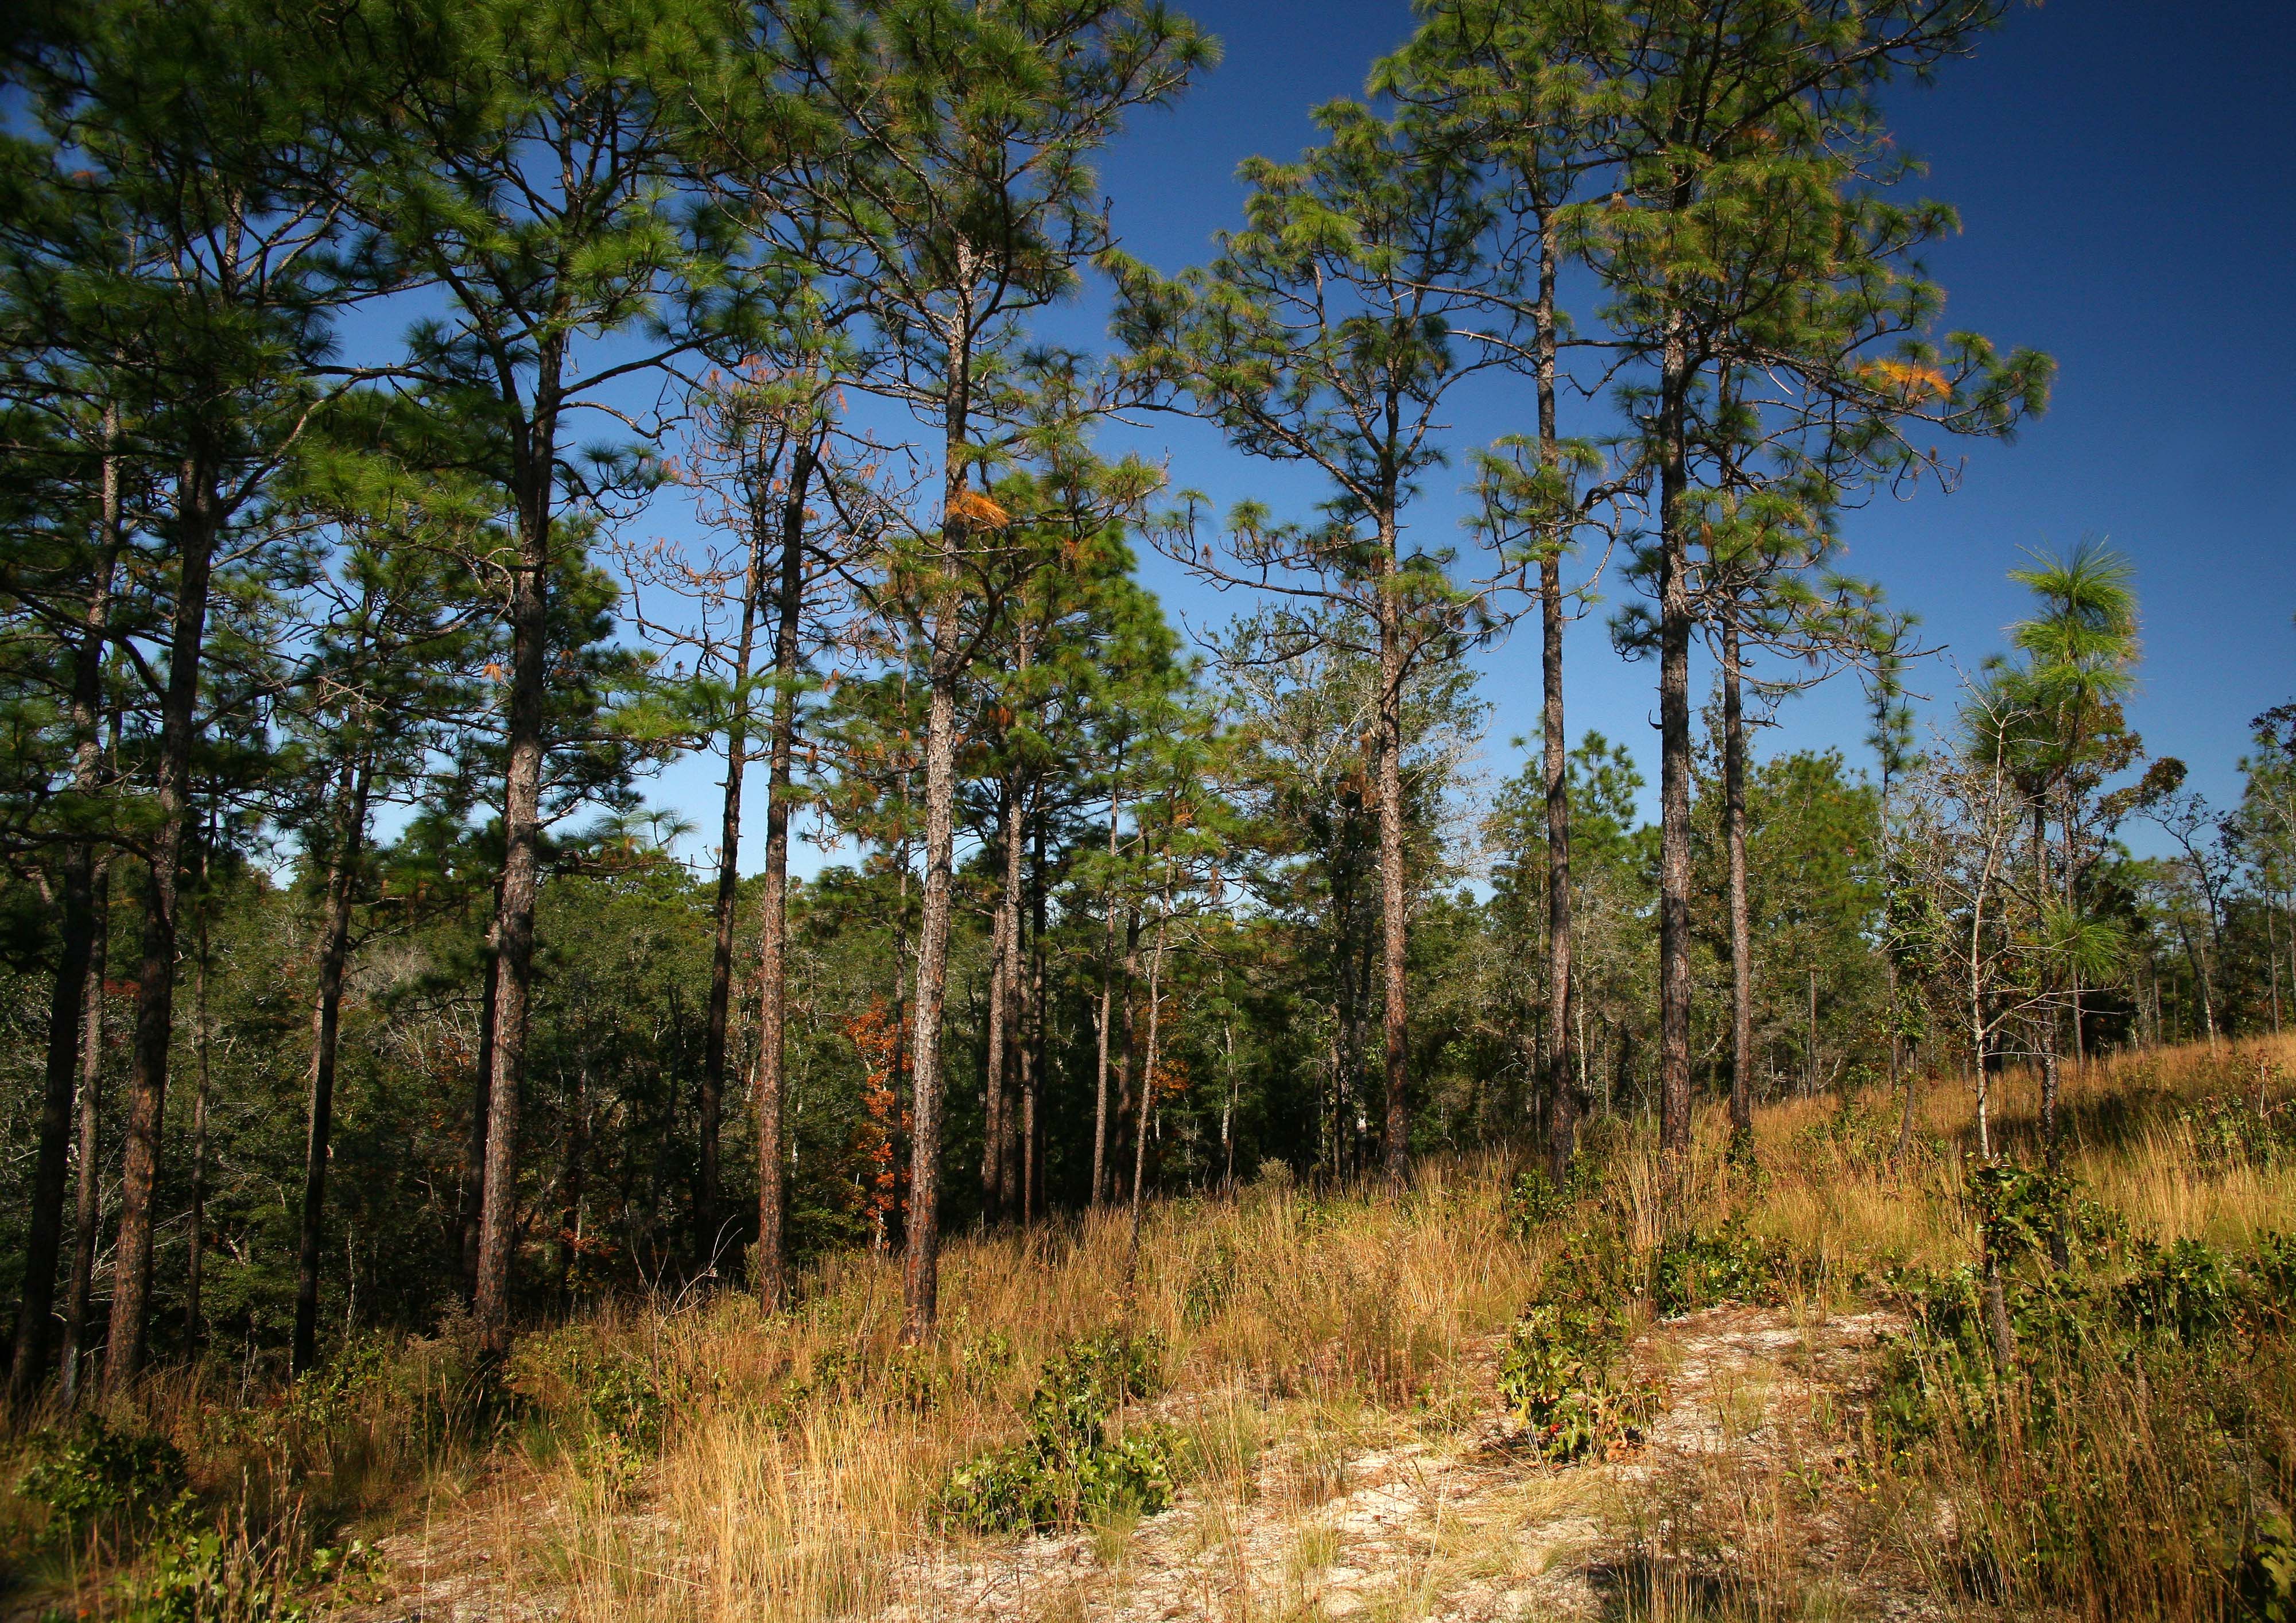 A stand of longleaf pine trees on a sandy hillside with grassy underbrush.